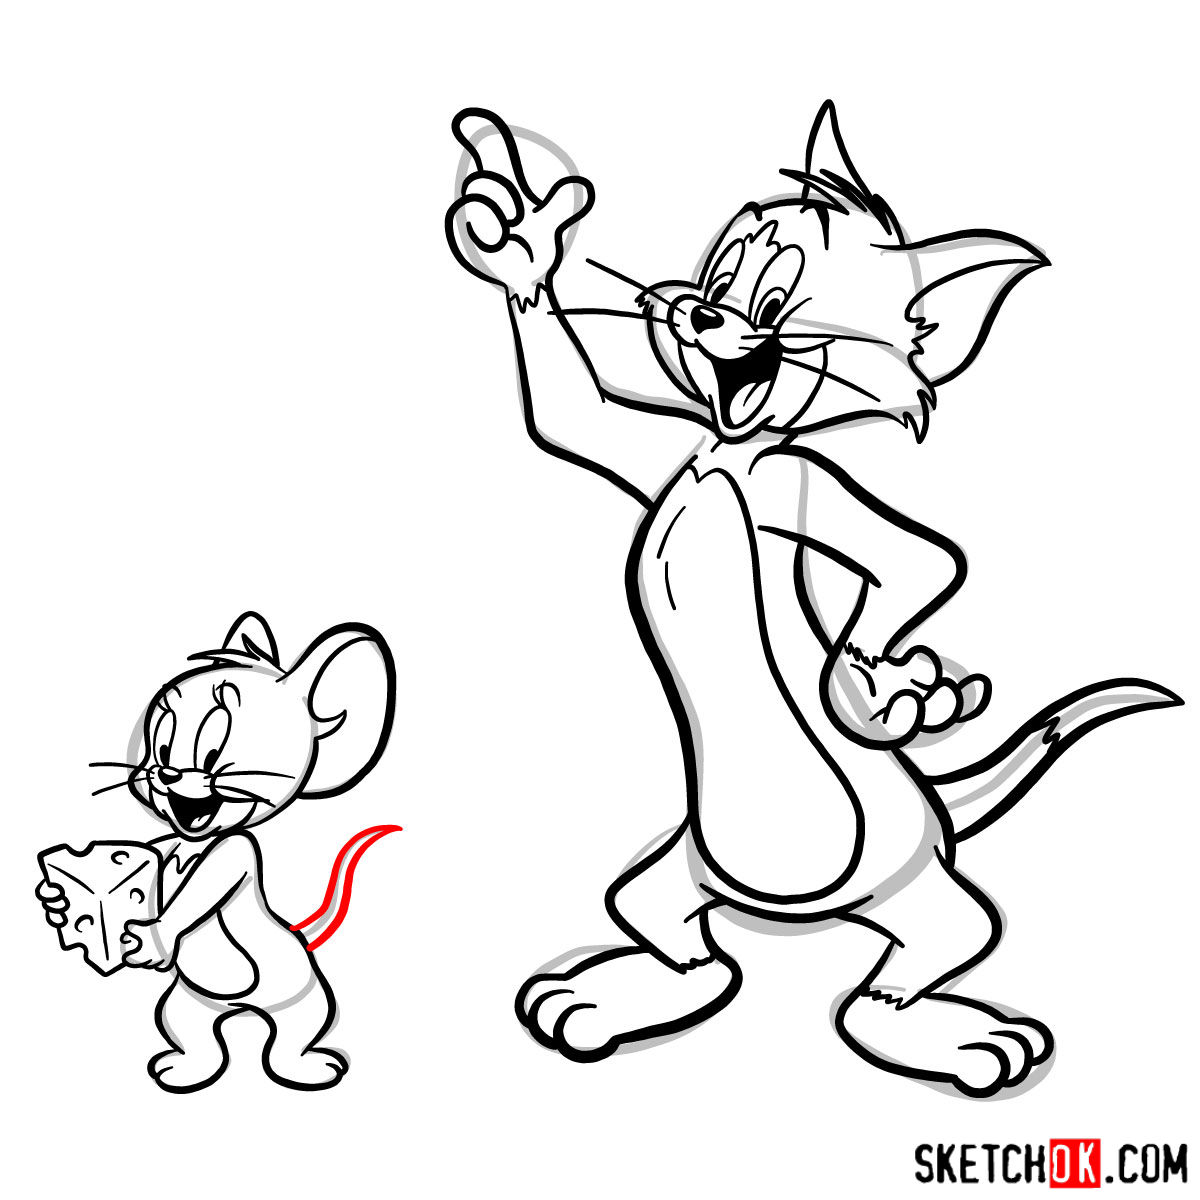 How to draw Tom and Jerry together - step 19